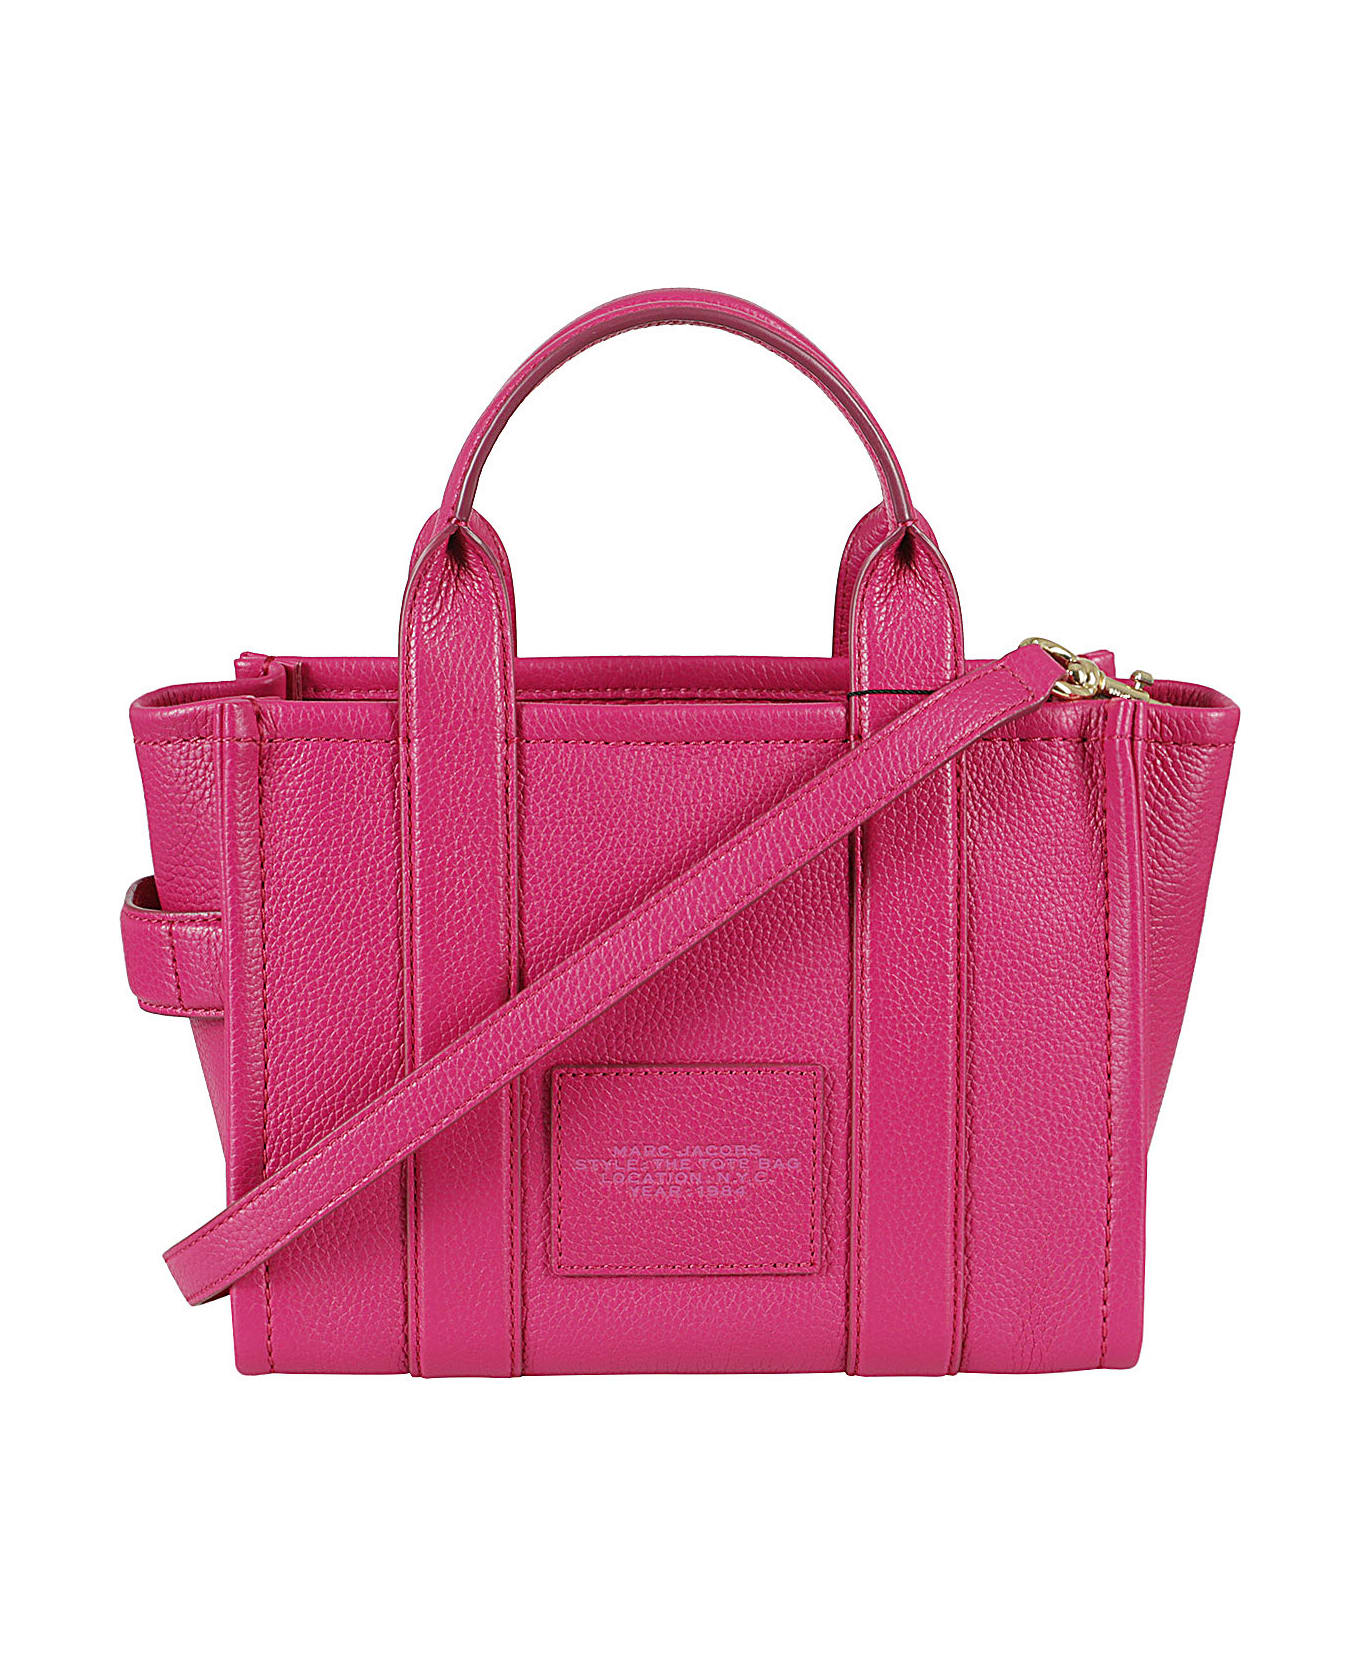 Marc Jacobs The Small Tote - Lipstick Pink